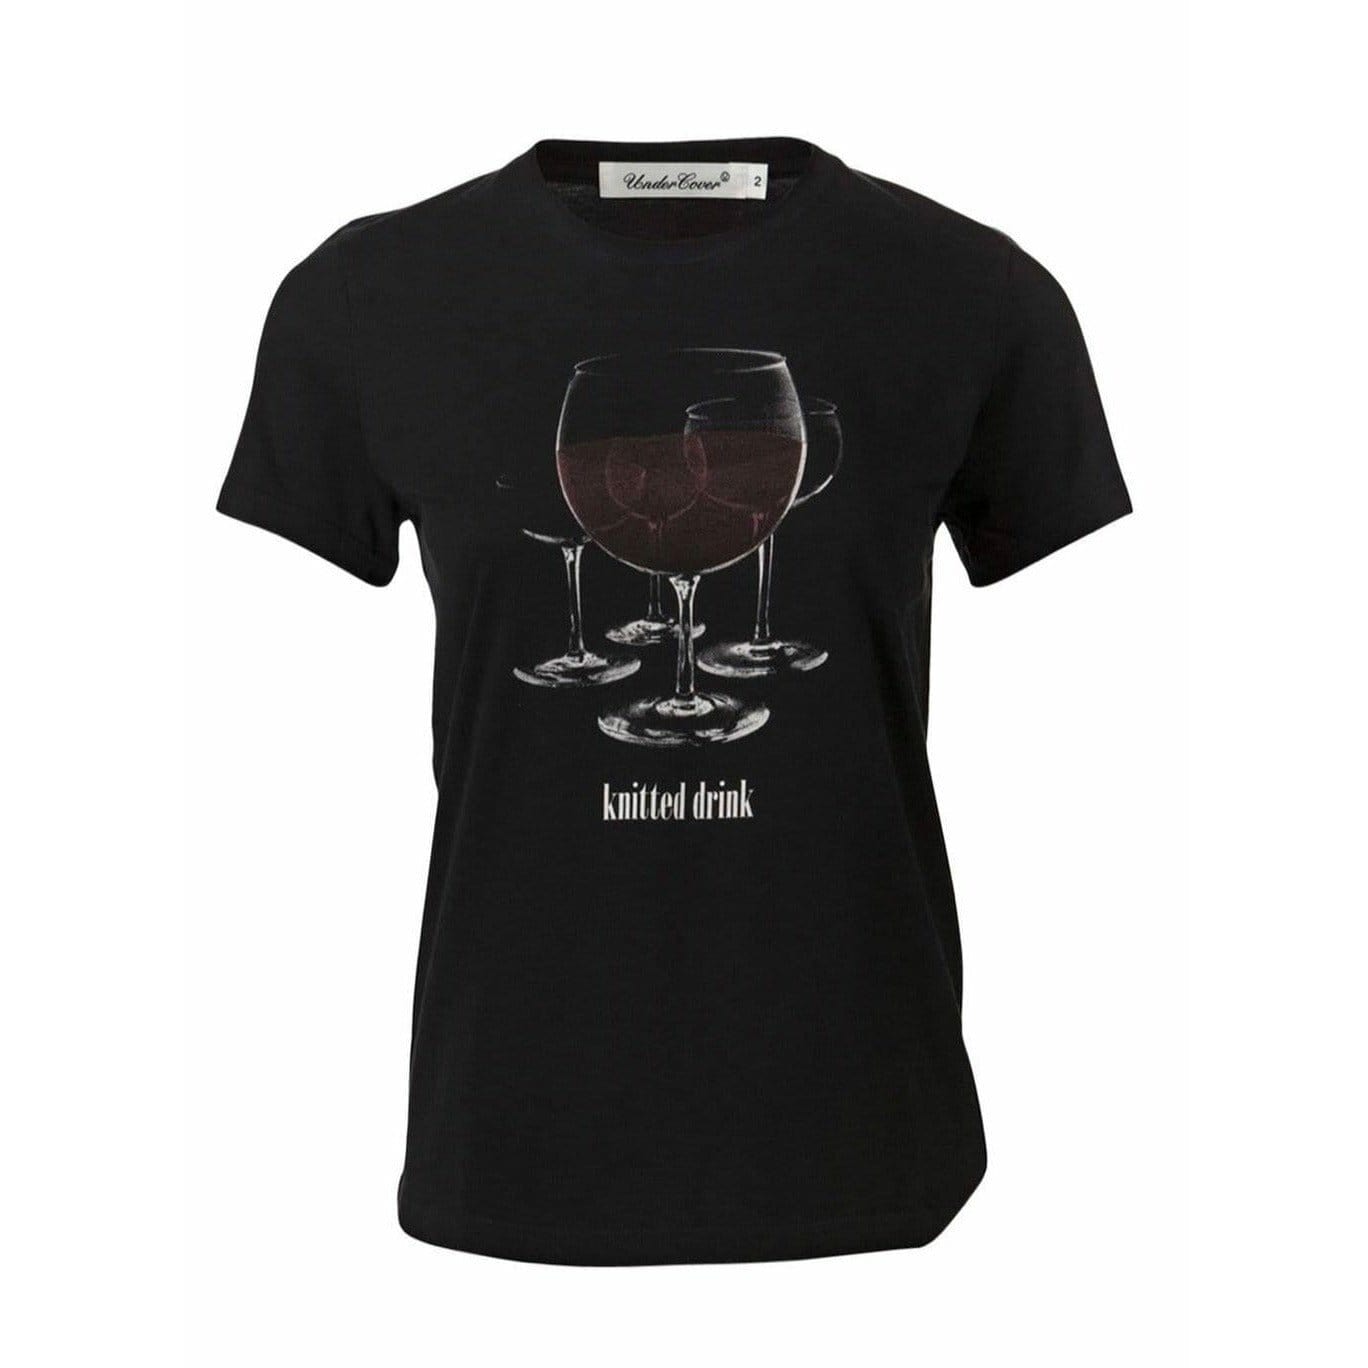 Undercover 'Kitted Drink' Black Cotton T - Shirt - Anastasia Boutique